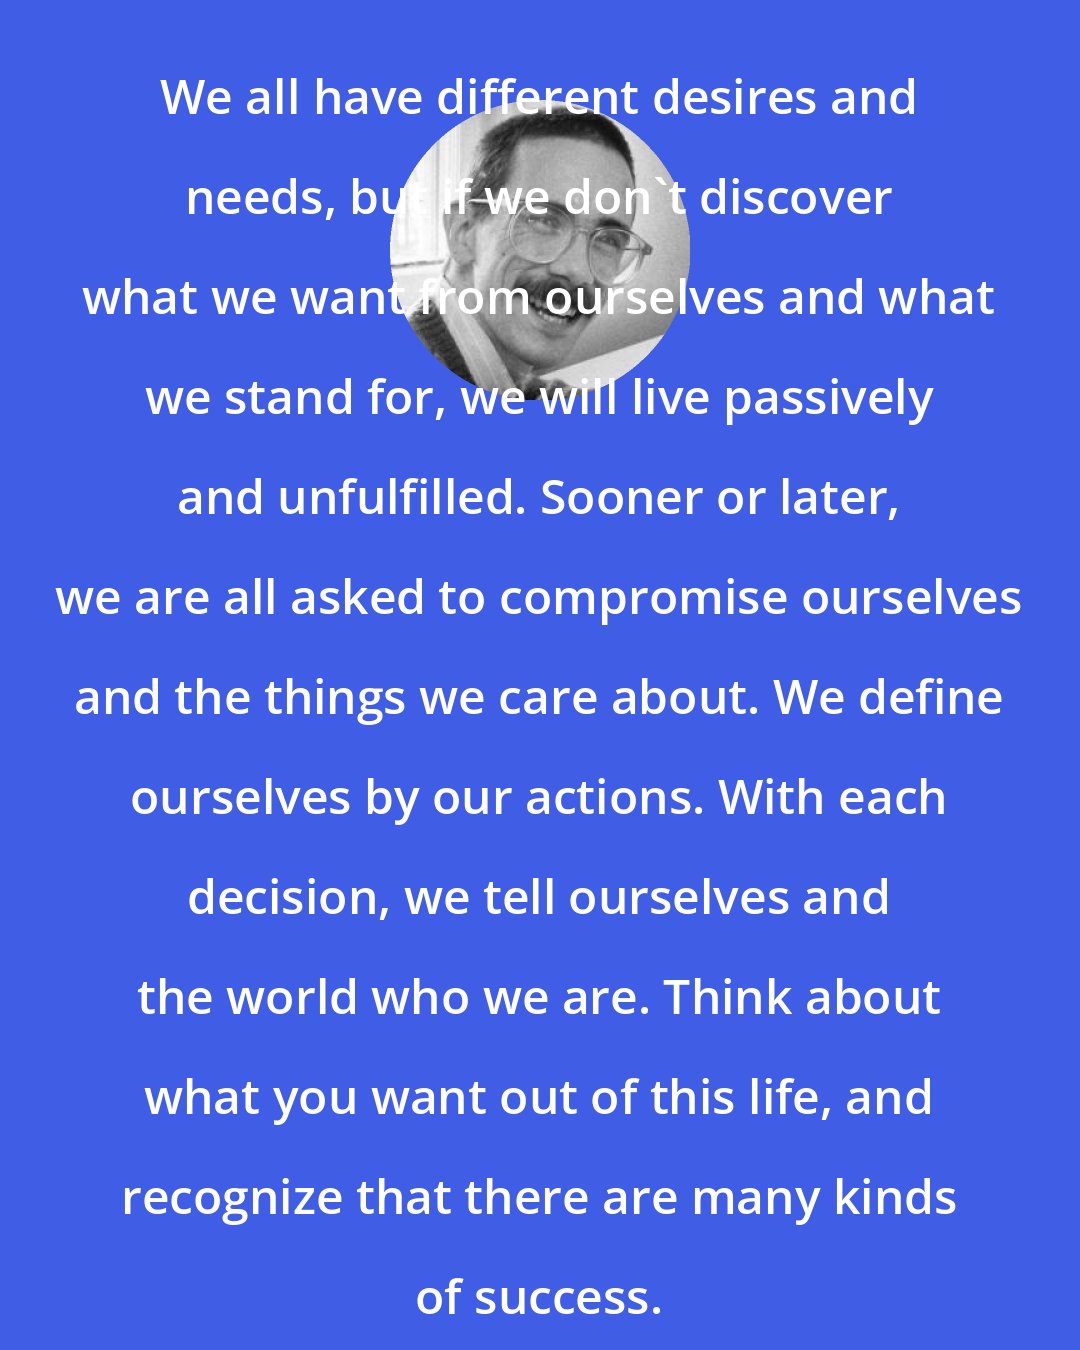 Bill Watterson: We all have different desires and needs, but if we don't discover what we want from ourselves and what we stand for, we will live passively and unfulfilled. Sooner or later, we are all asked to compromise ourselves and the things we care about. We define ourselves by our actions. With each decision, we tell ourselves and the world who we are. Think about what you want out of this life, and recognize that there are many kinds of success.